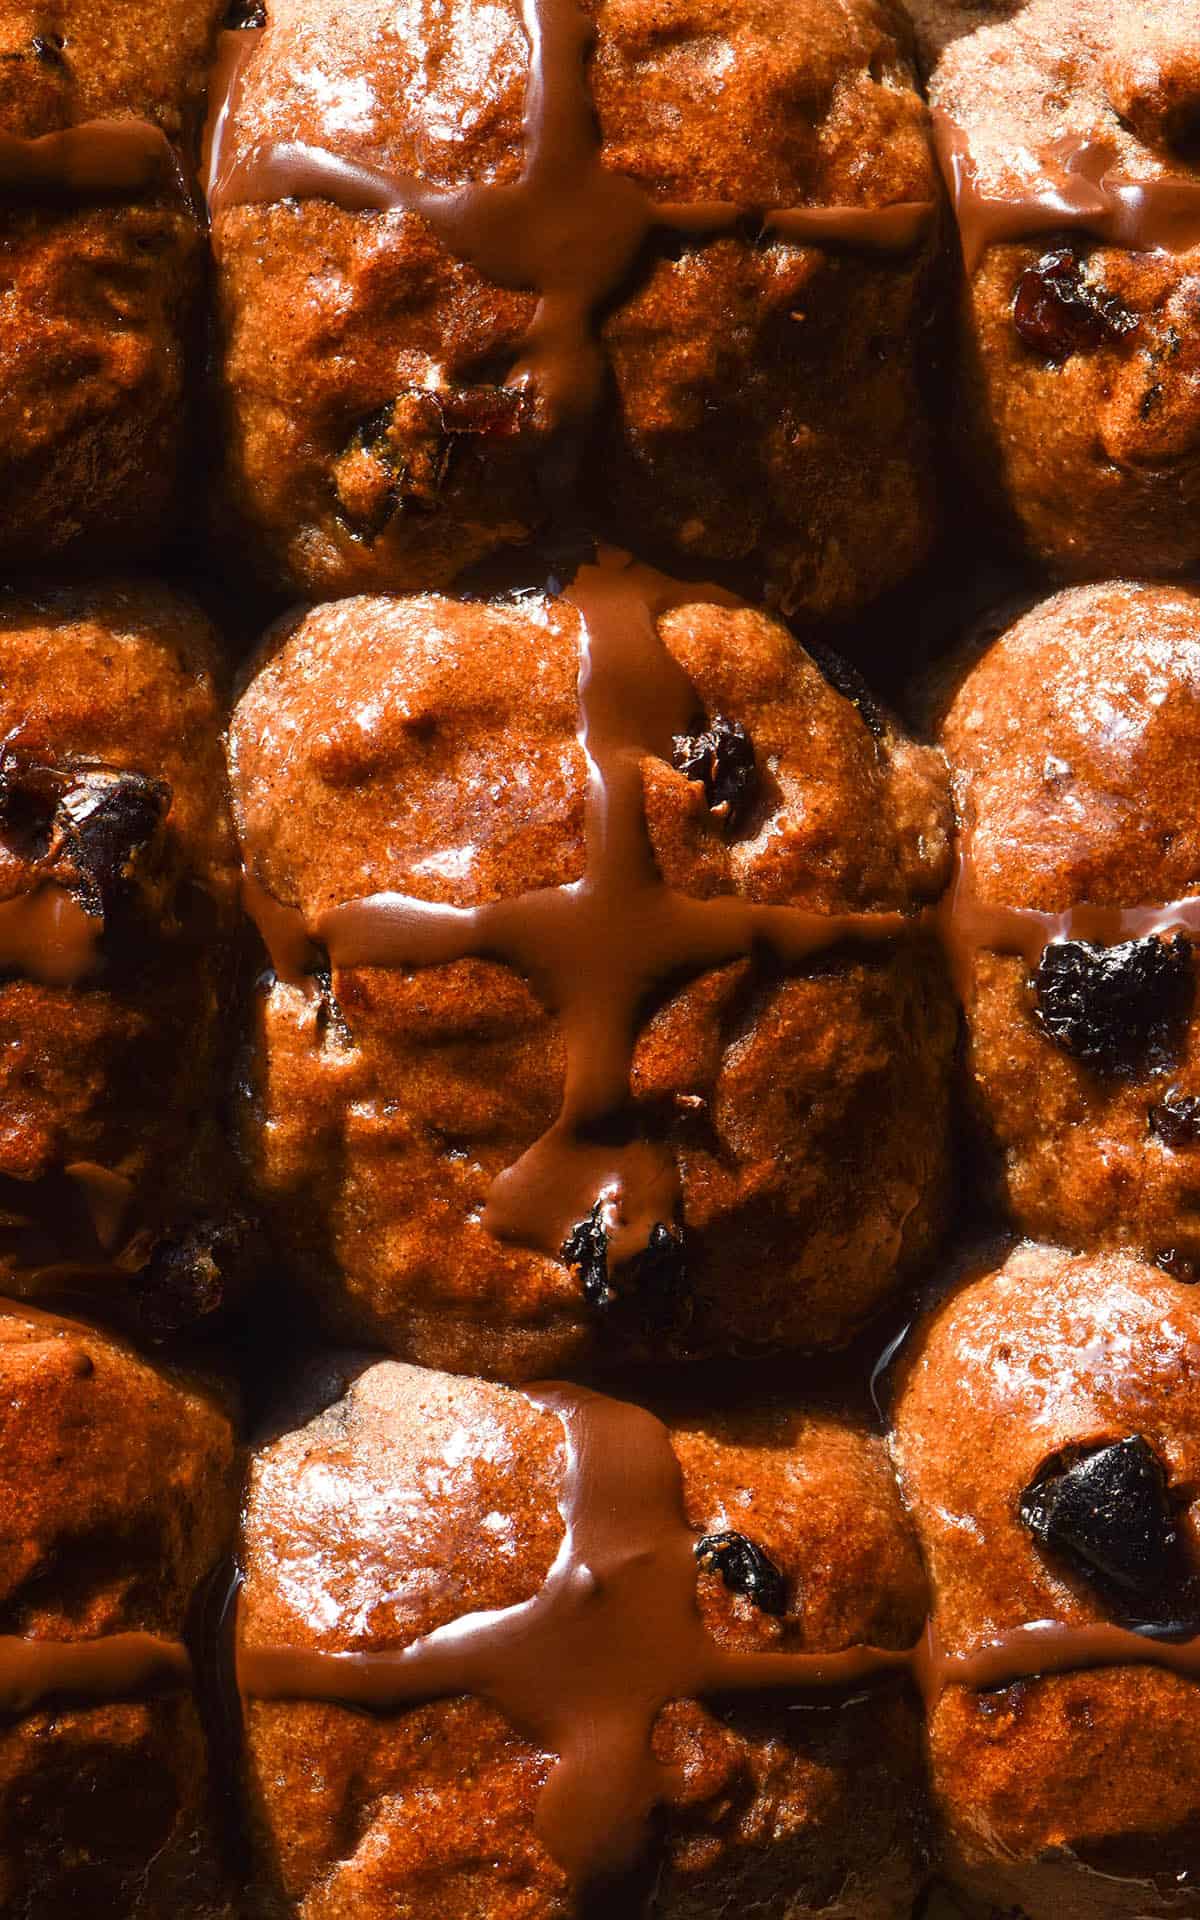 Gluten free hot cross buns without yeast